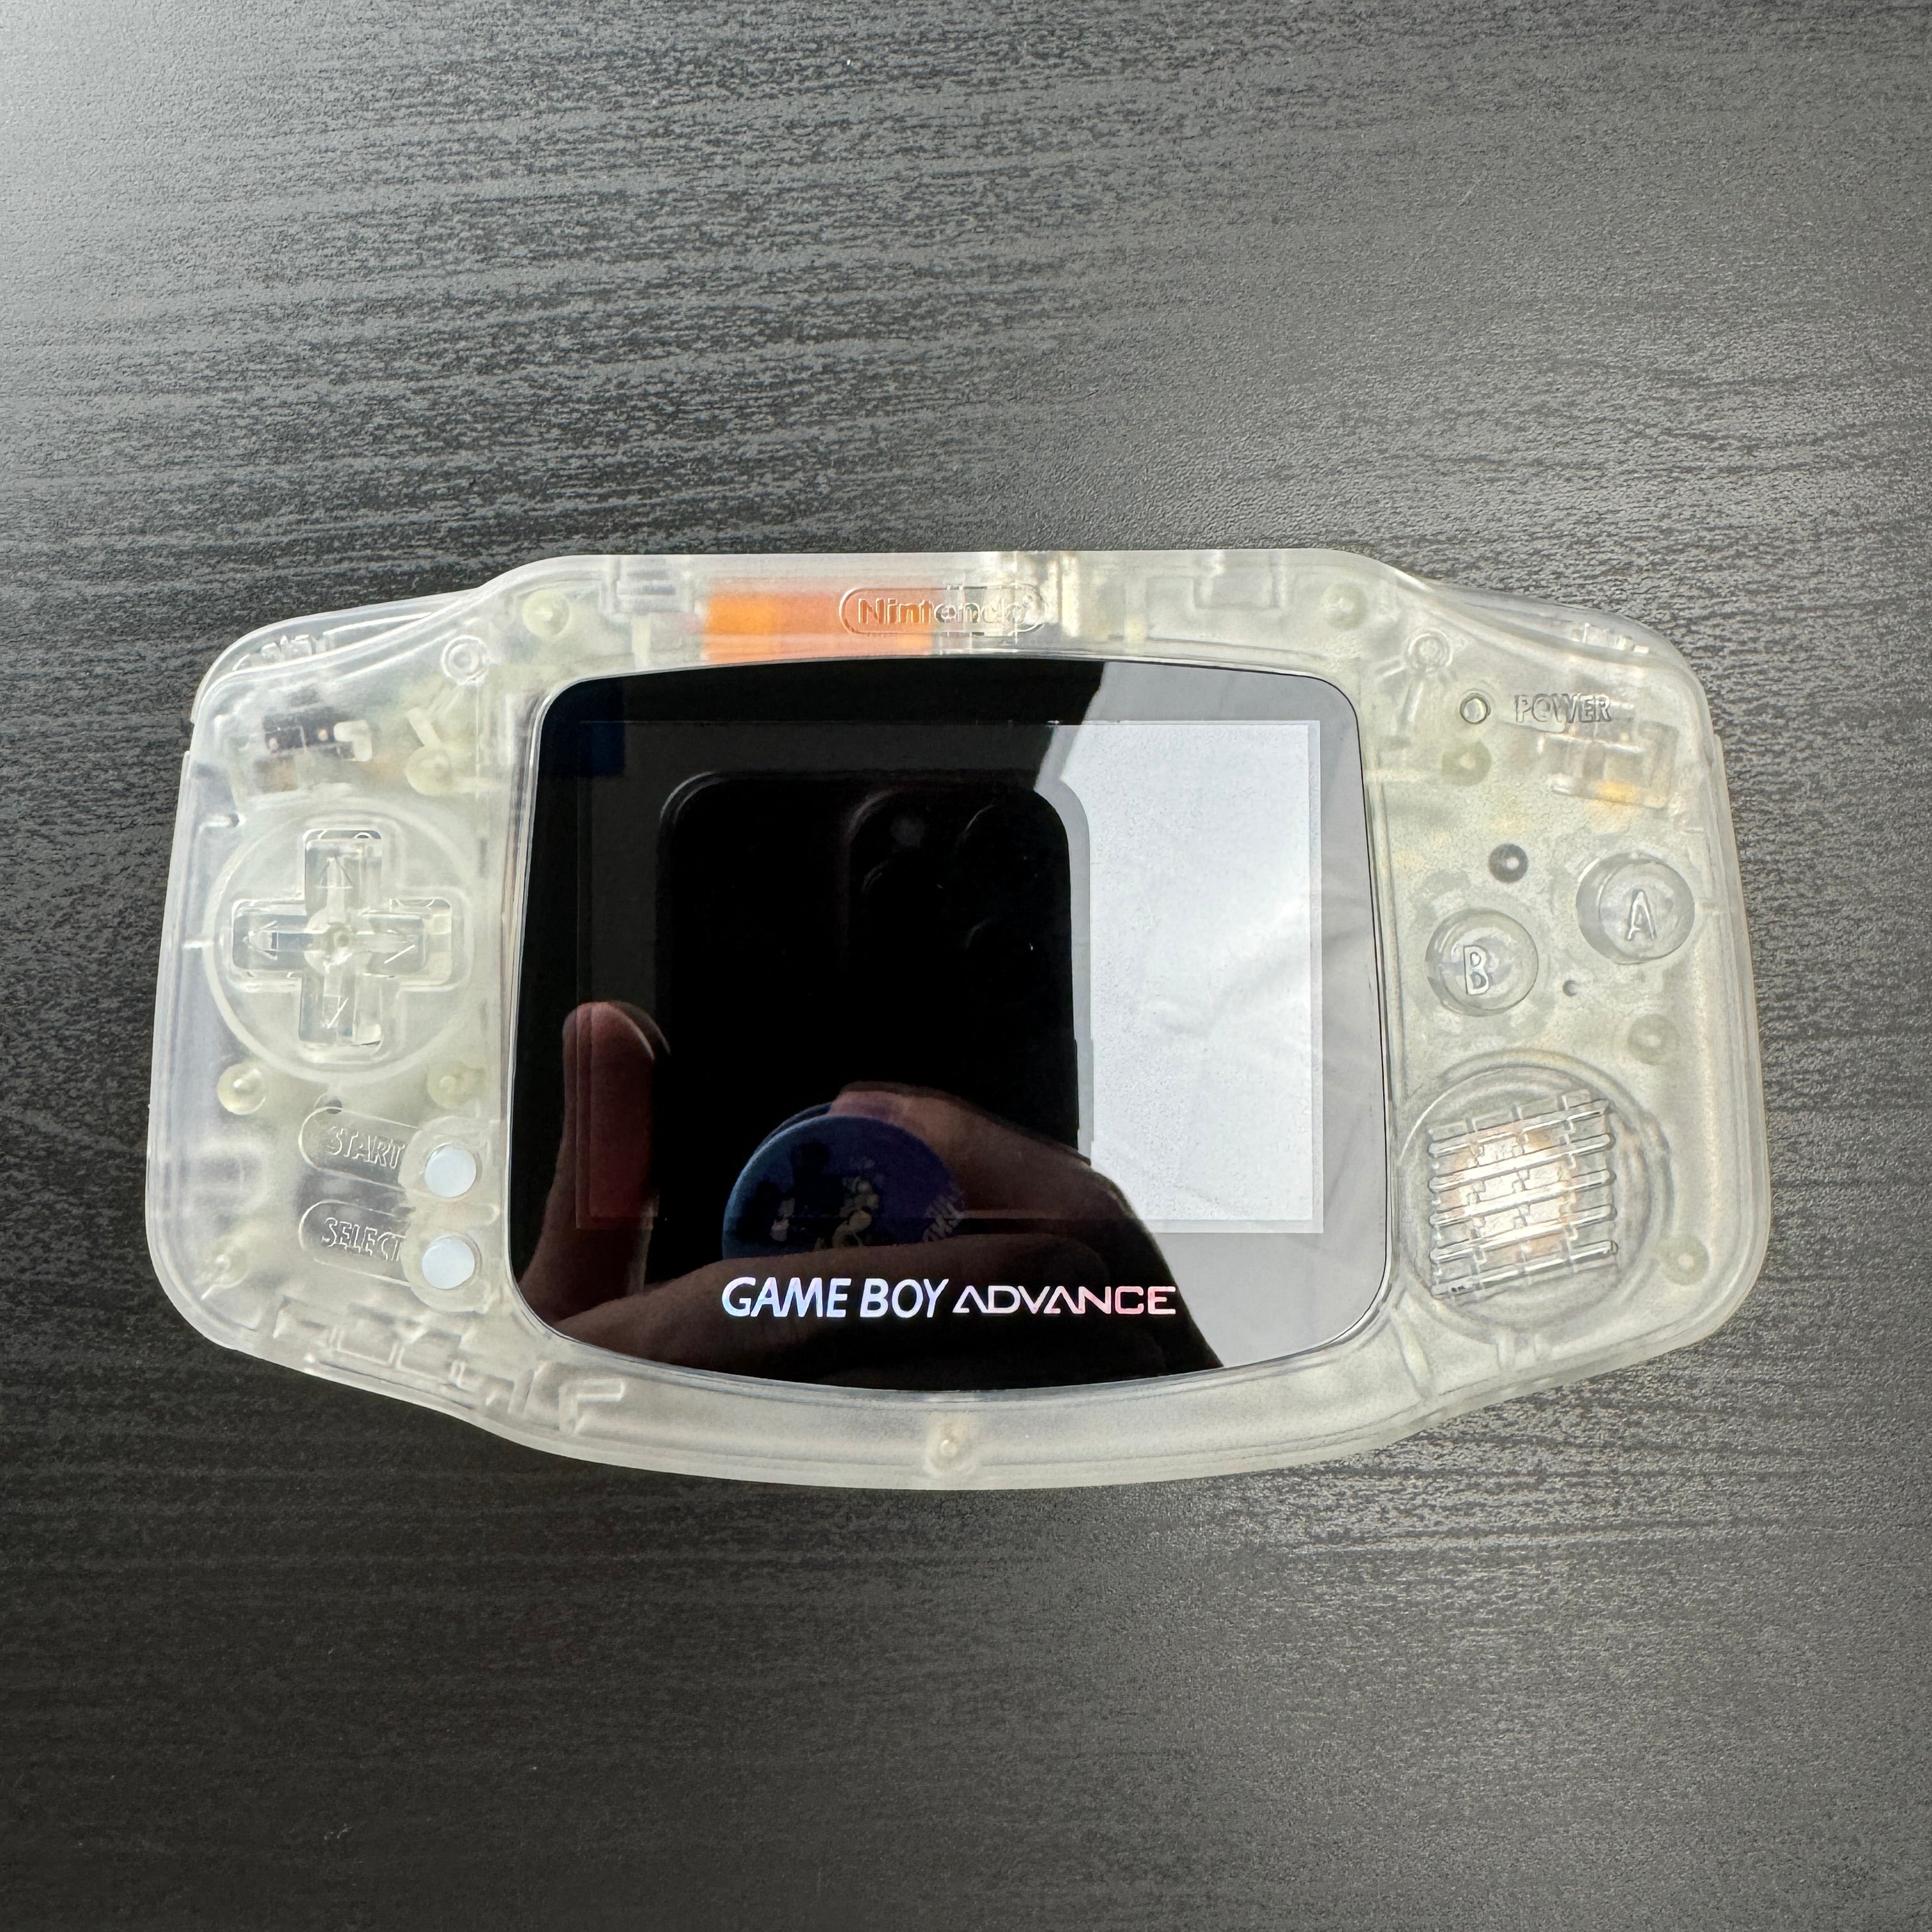 Modded Game Boy Advance W/ IPS V2 Screen (All Clear)